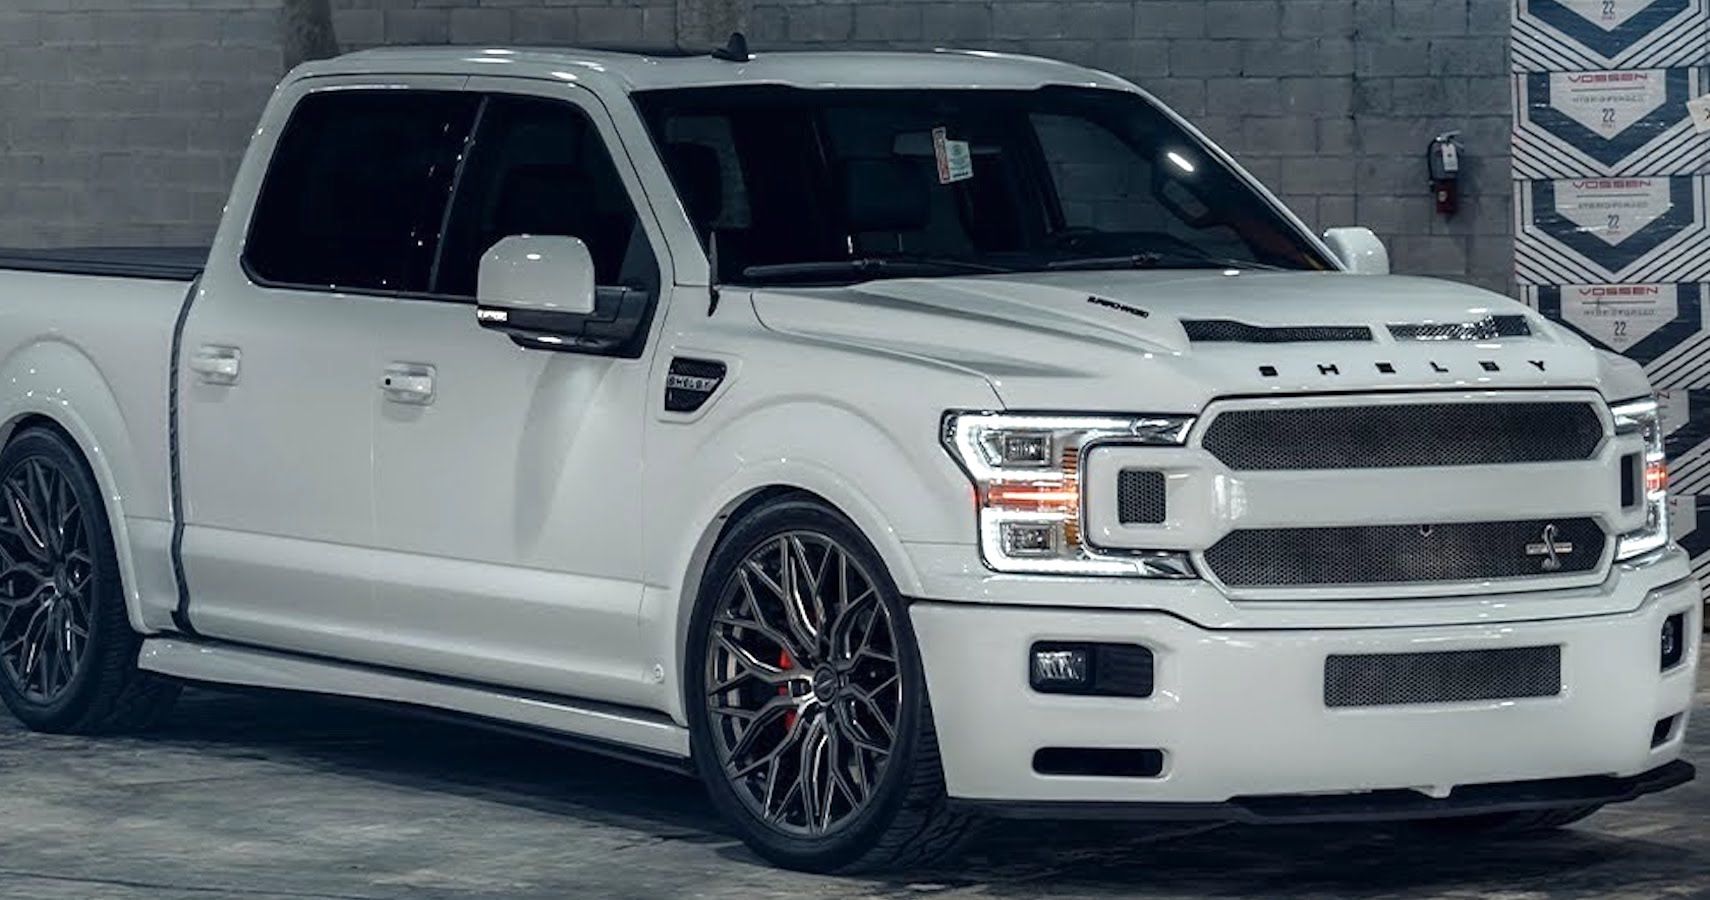 F150 Shelby Super Snake Equipped With Vossen Wheels Is A Street Monster